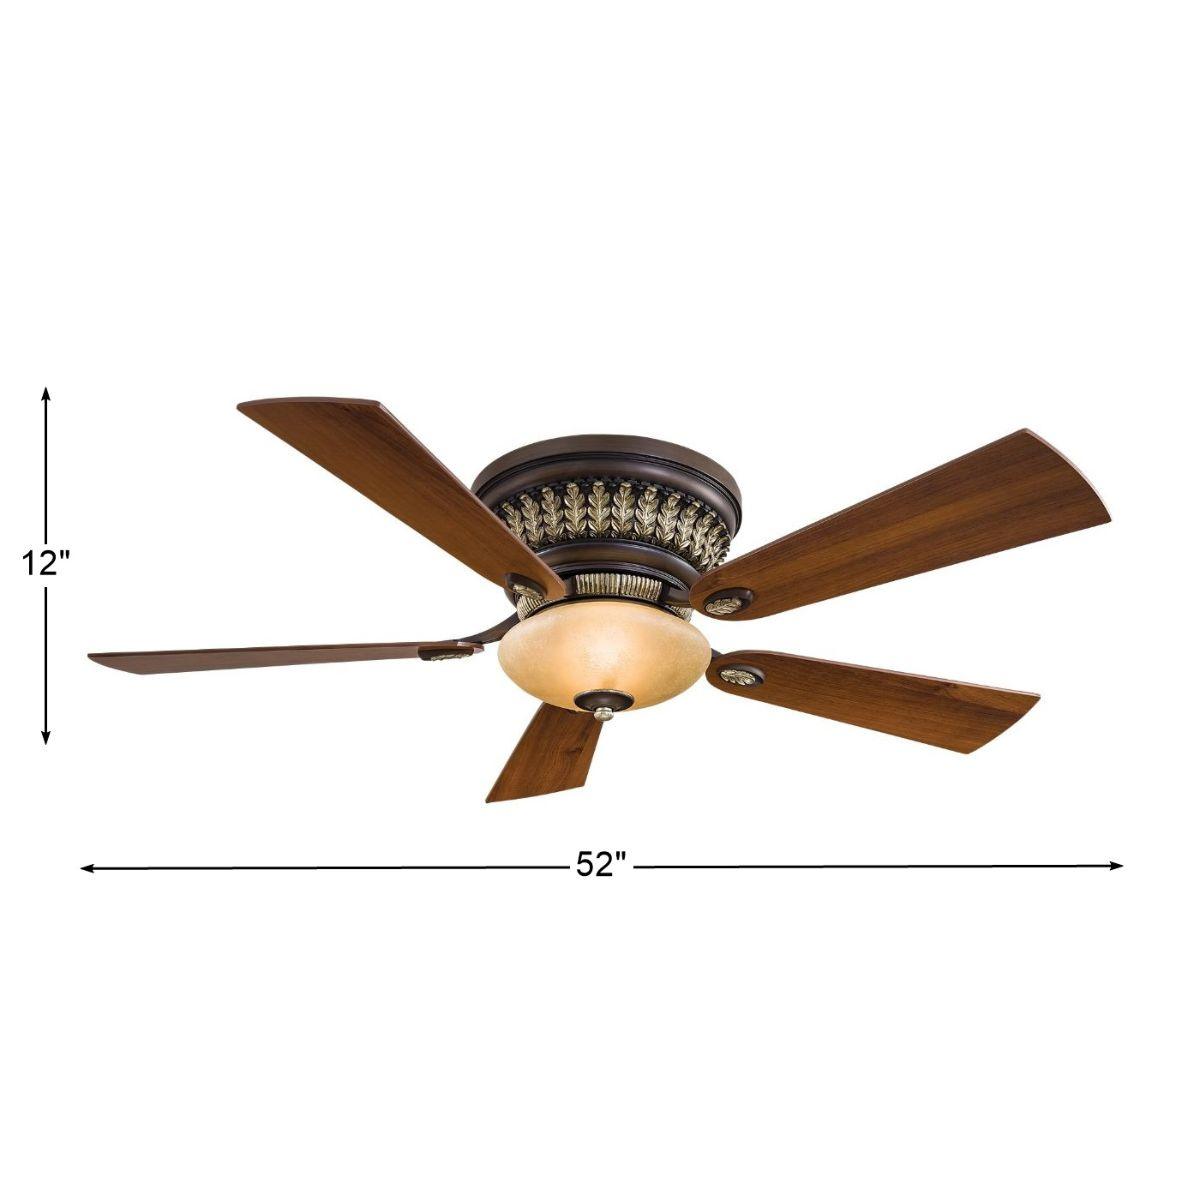 Calais 52 Inch Ceiling Fan With Light And Remote, Belcaro Walnut Finish - Bees Lighting